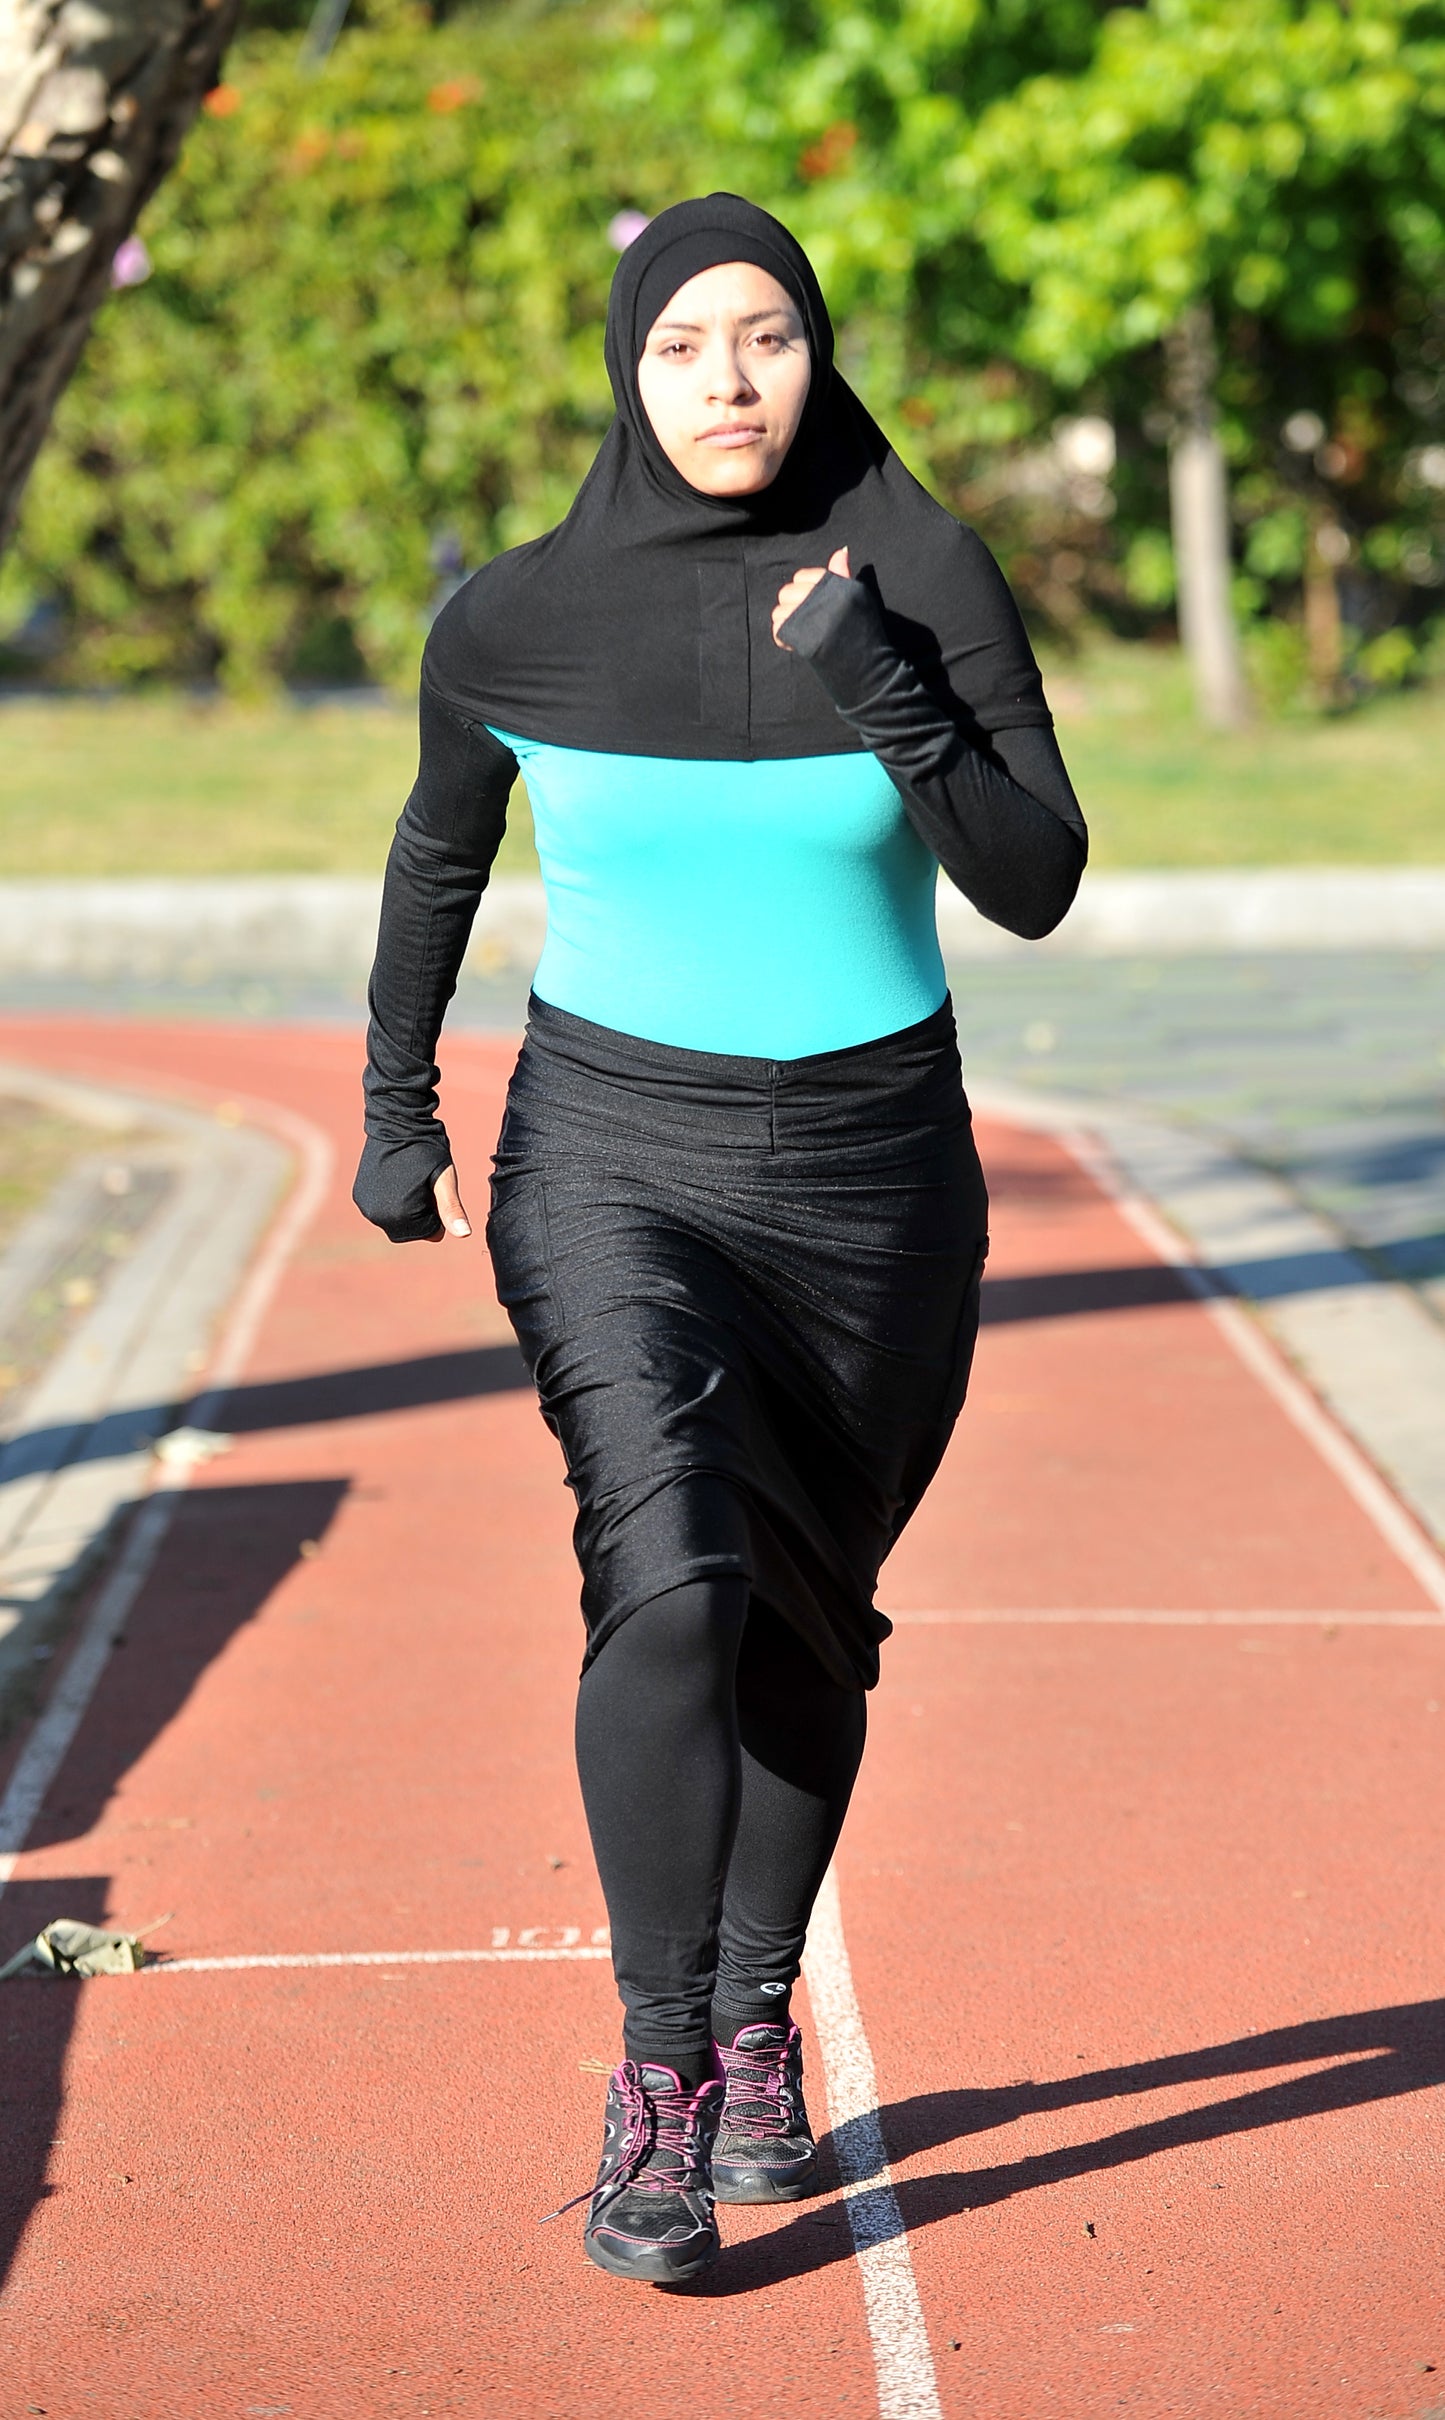 Hijab for Runners